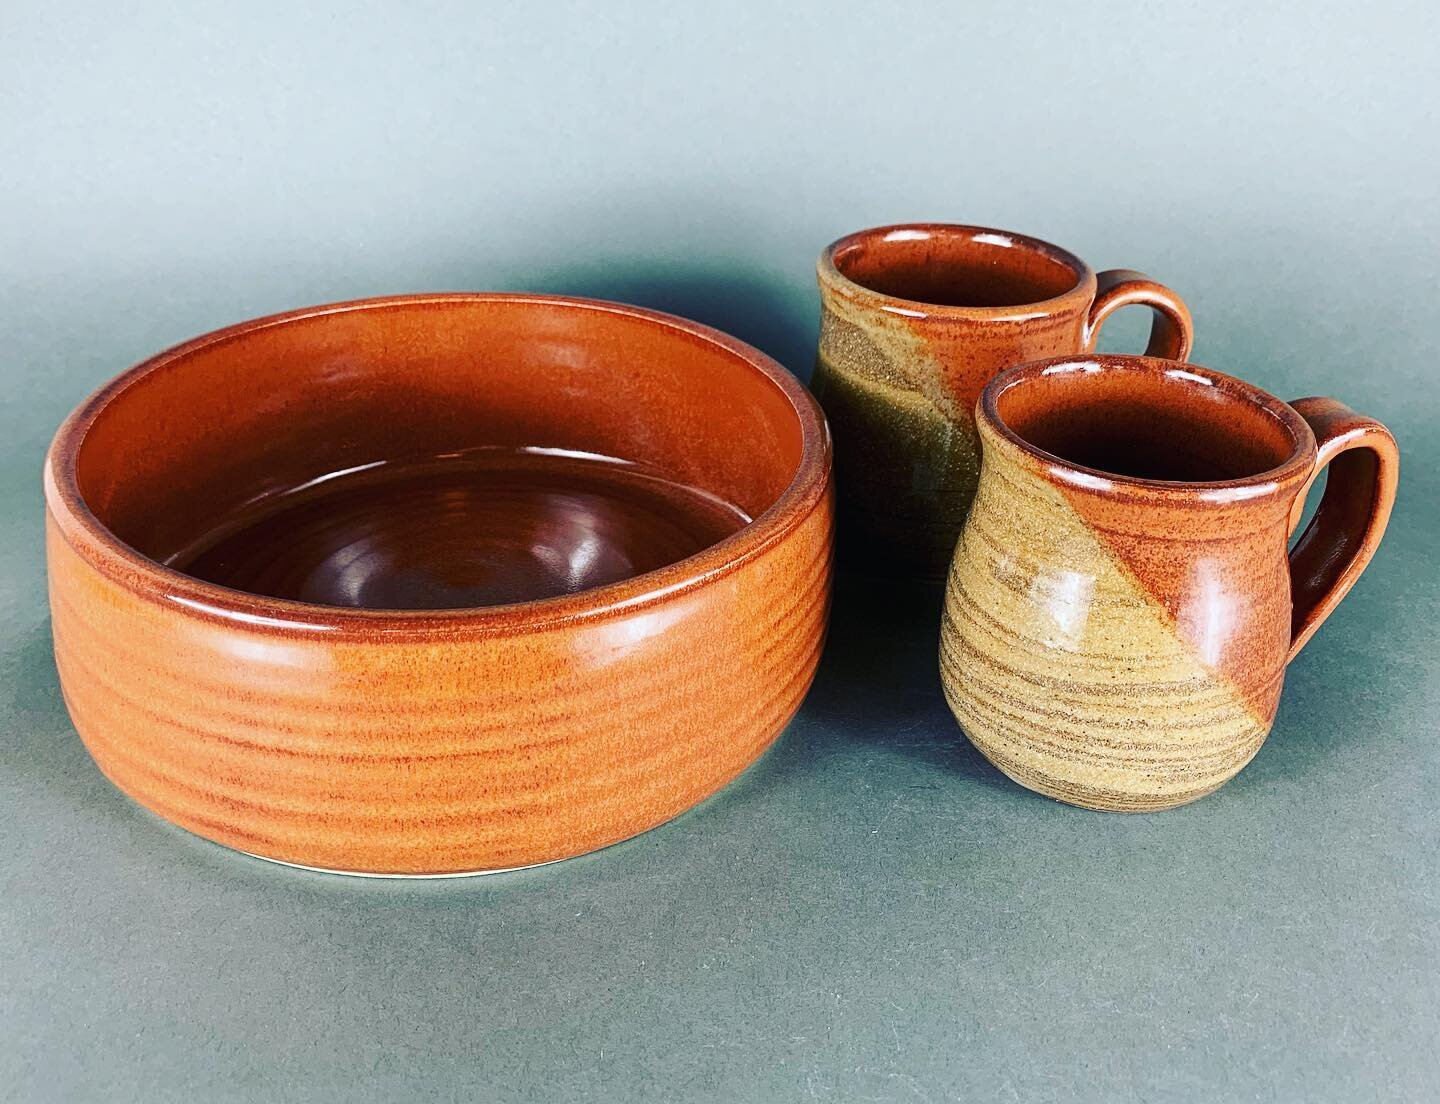 Check out the fresh batch of pottery heading for tomorrow&rsquo;s (6/5) farmers market! We&rsquo;ll be there from 7am-11am. Come say hello! #rogerscountyfarmersmarket #wheelthrownpottery #makerssupportingmakers #farmersrock #mugs #planters